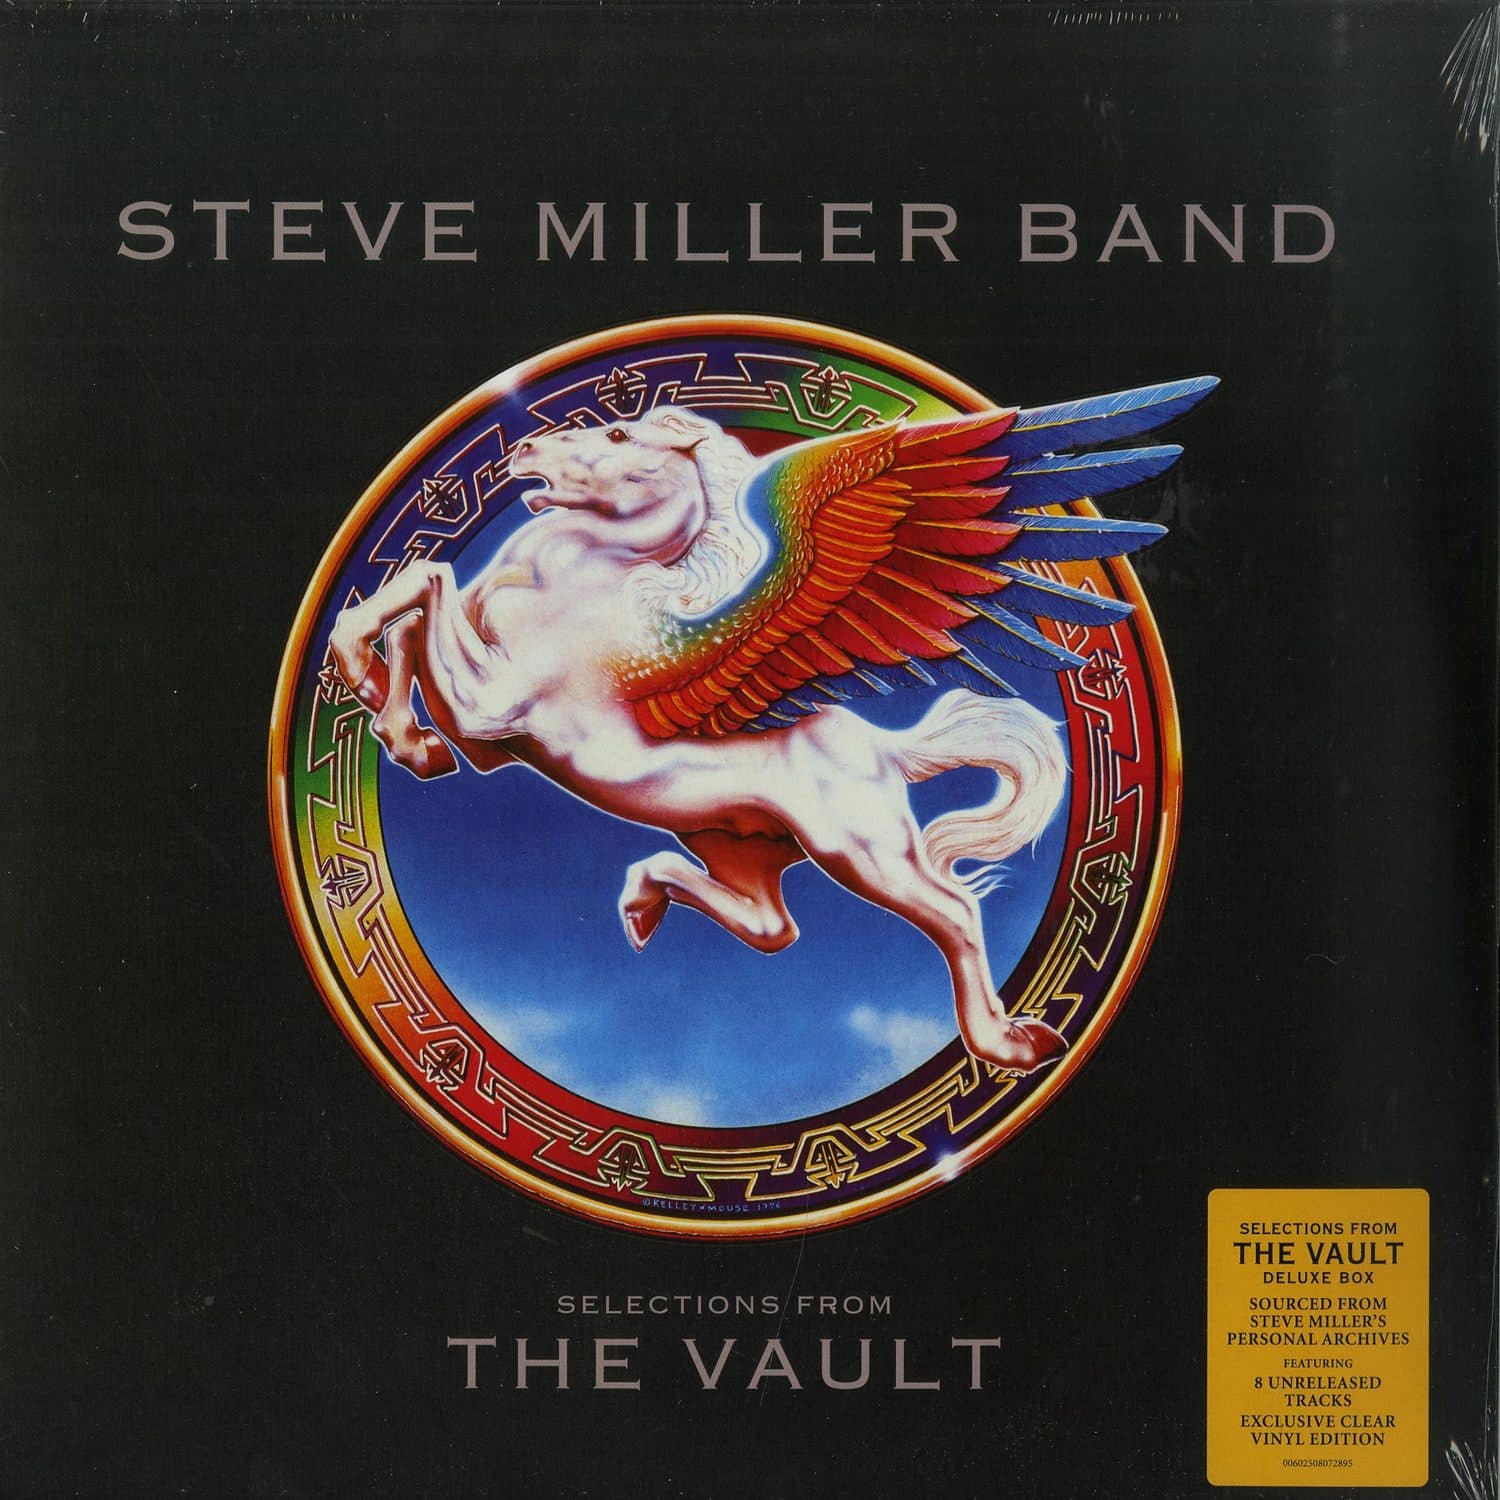 Steve Miller Band - SELECTIONS FROM THE VAULT 